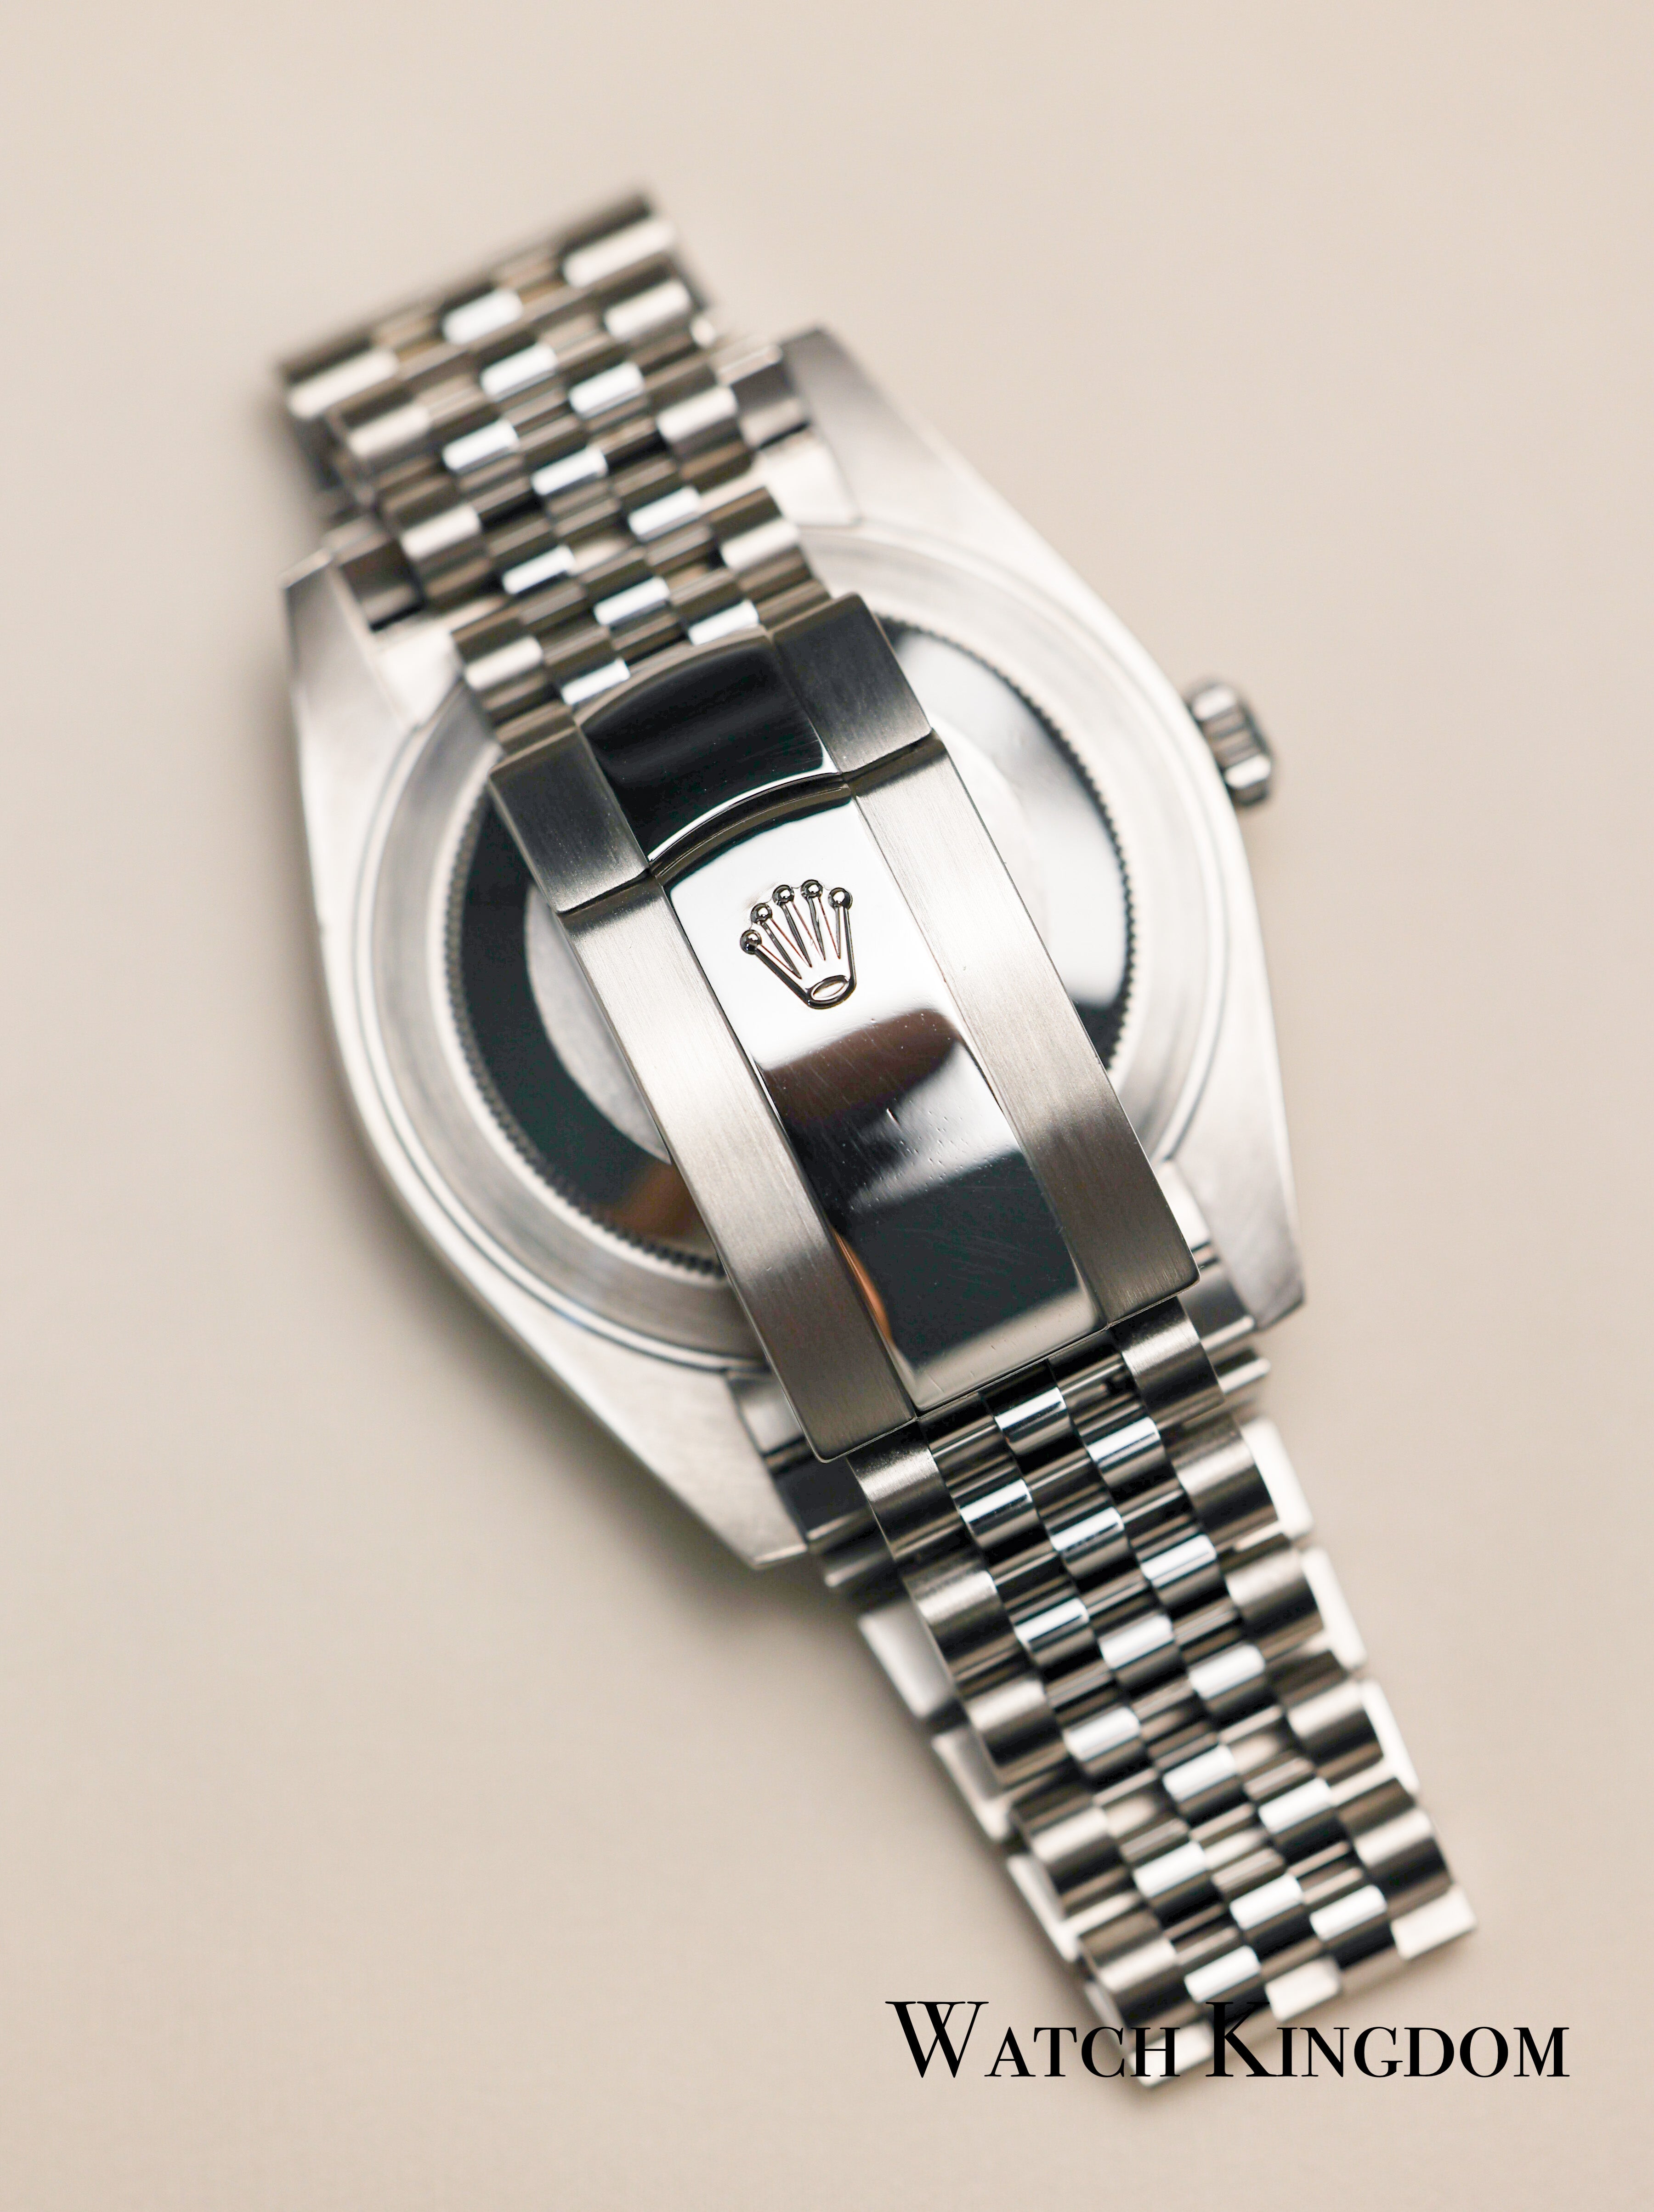 Queen Jubilee Years|316l Stainless Steel Jubilee Watch Band 22mm - Solid  Curved End For Mdv-106